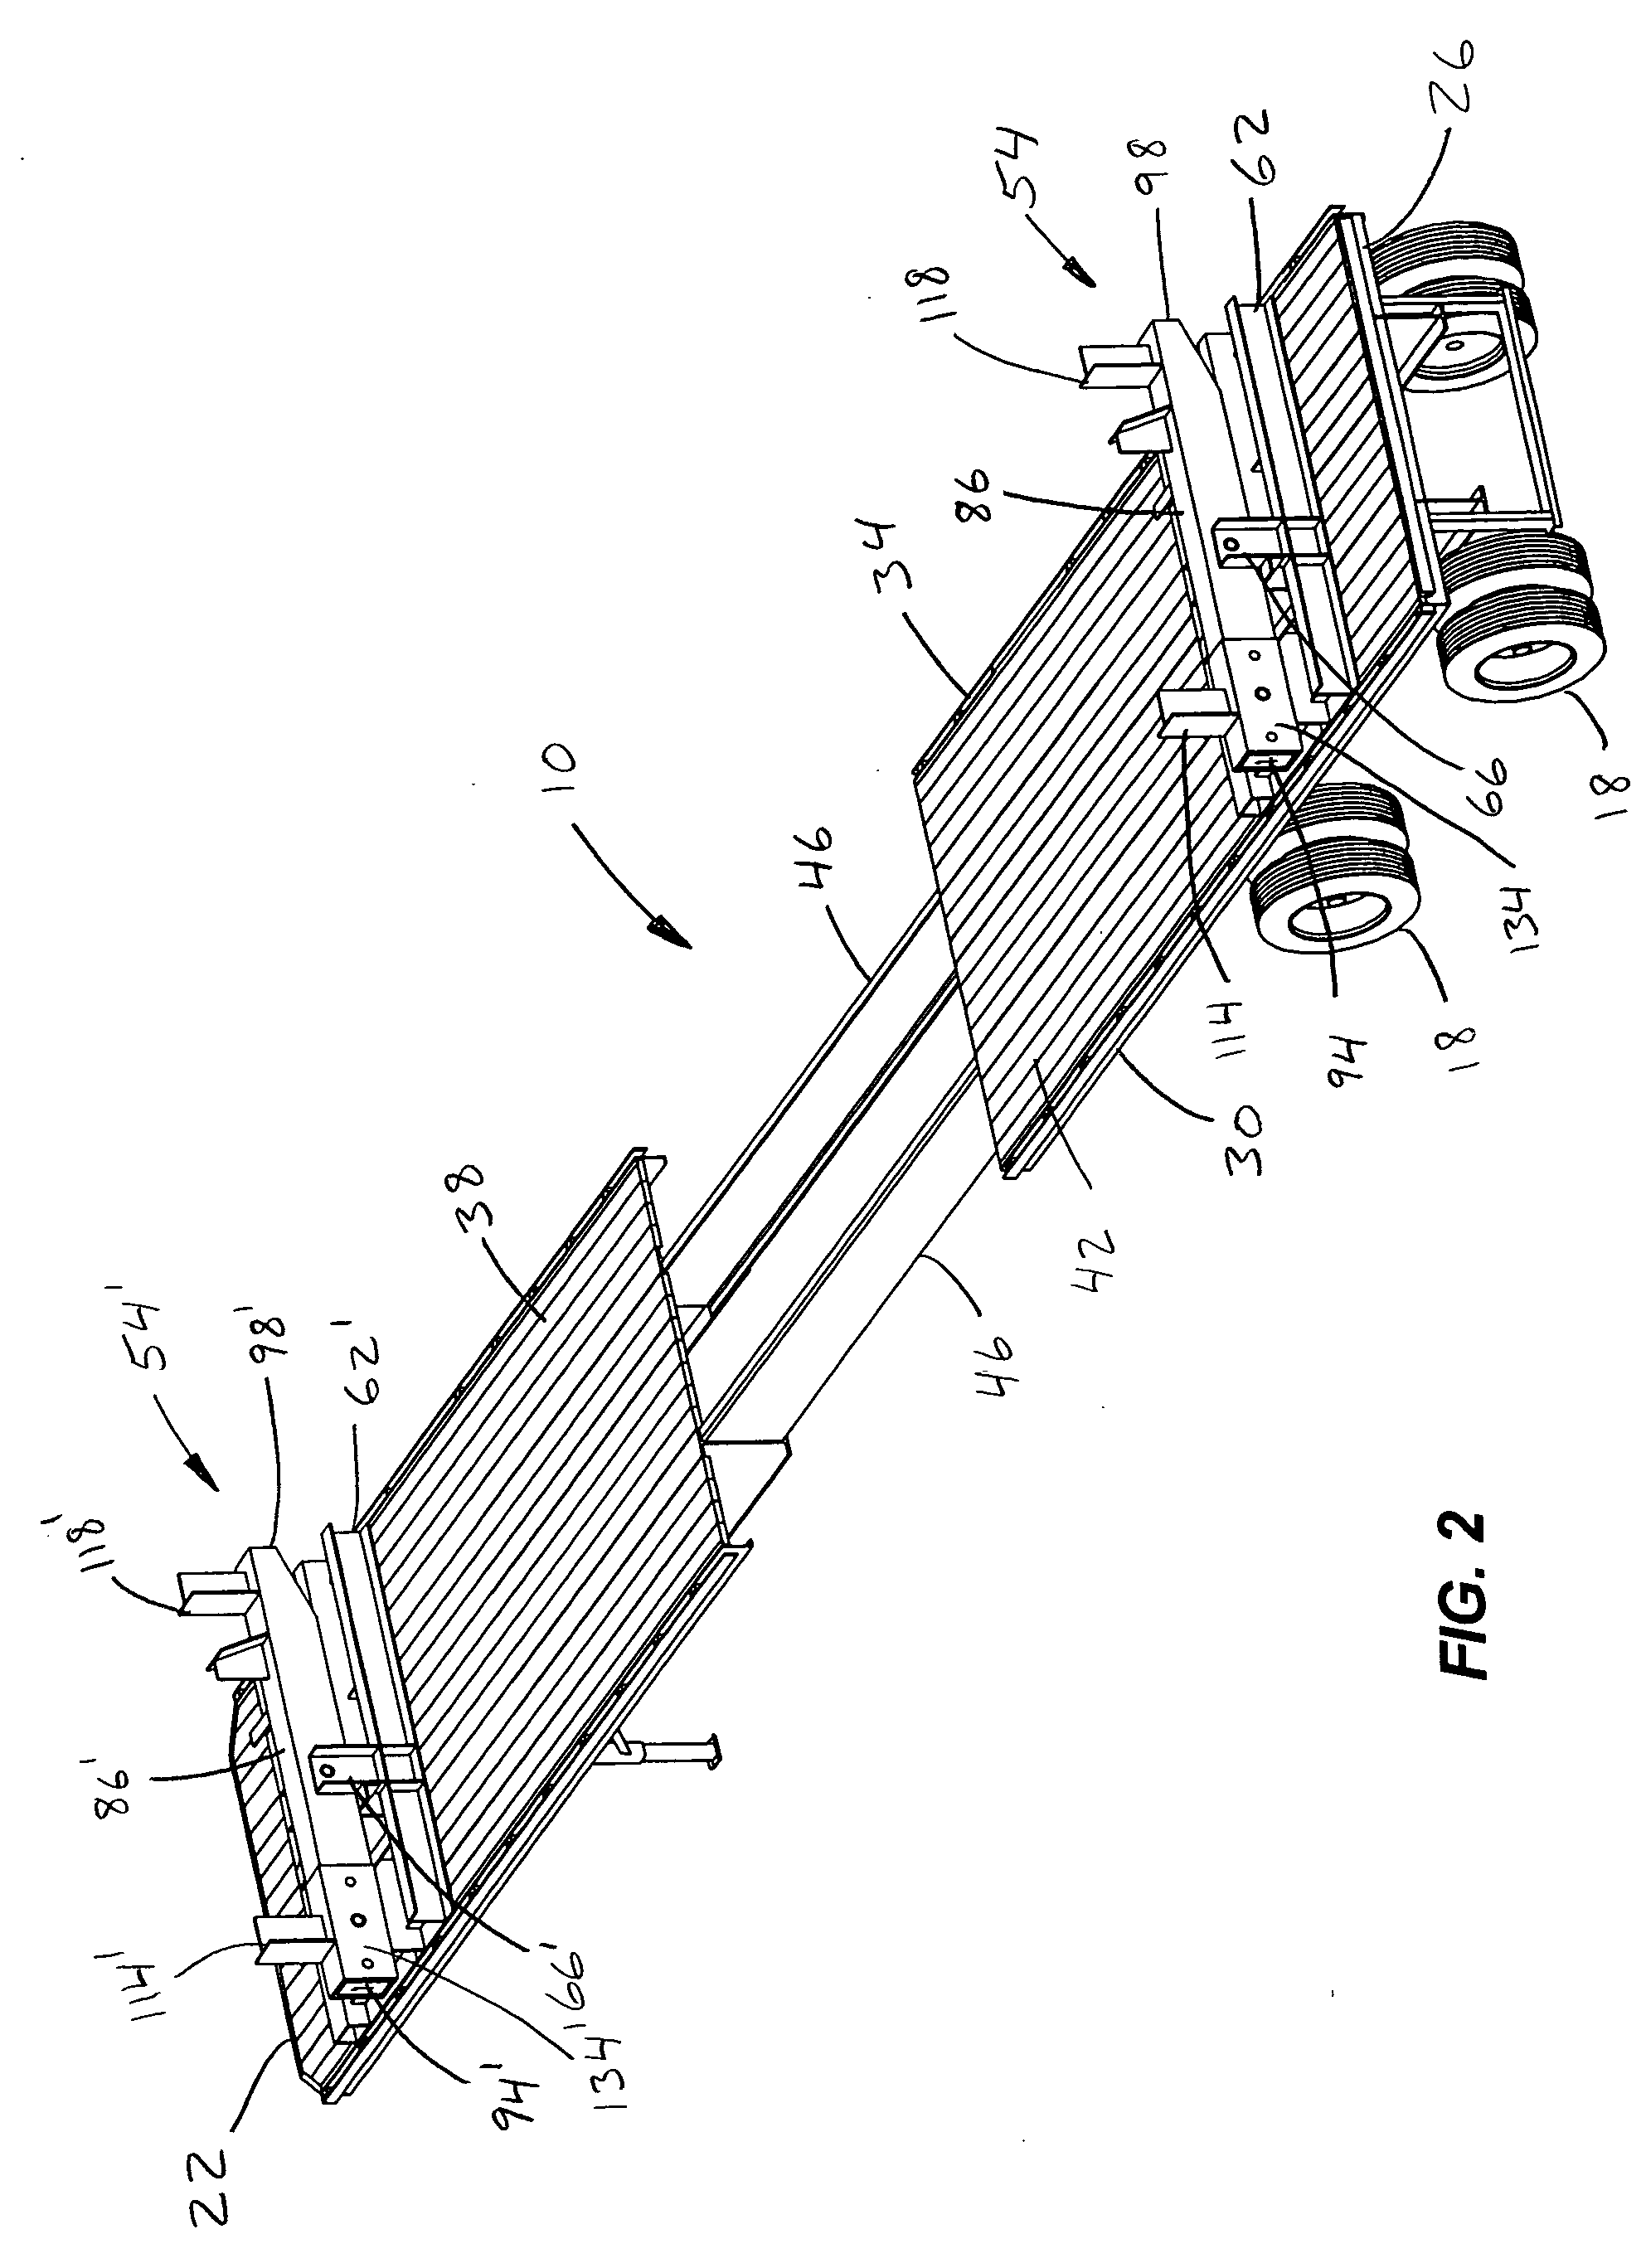 Support structure apparatus and method